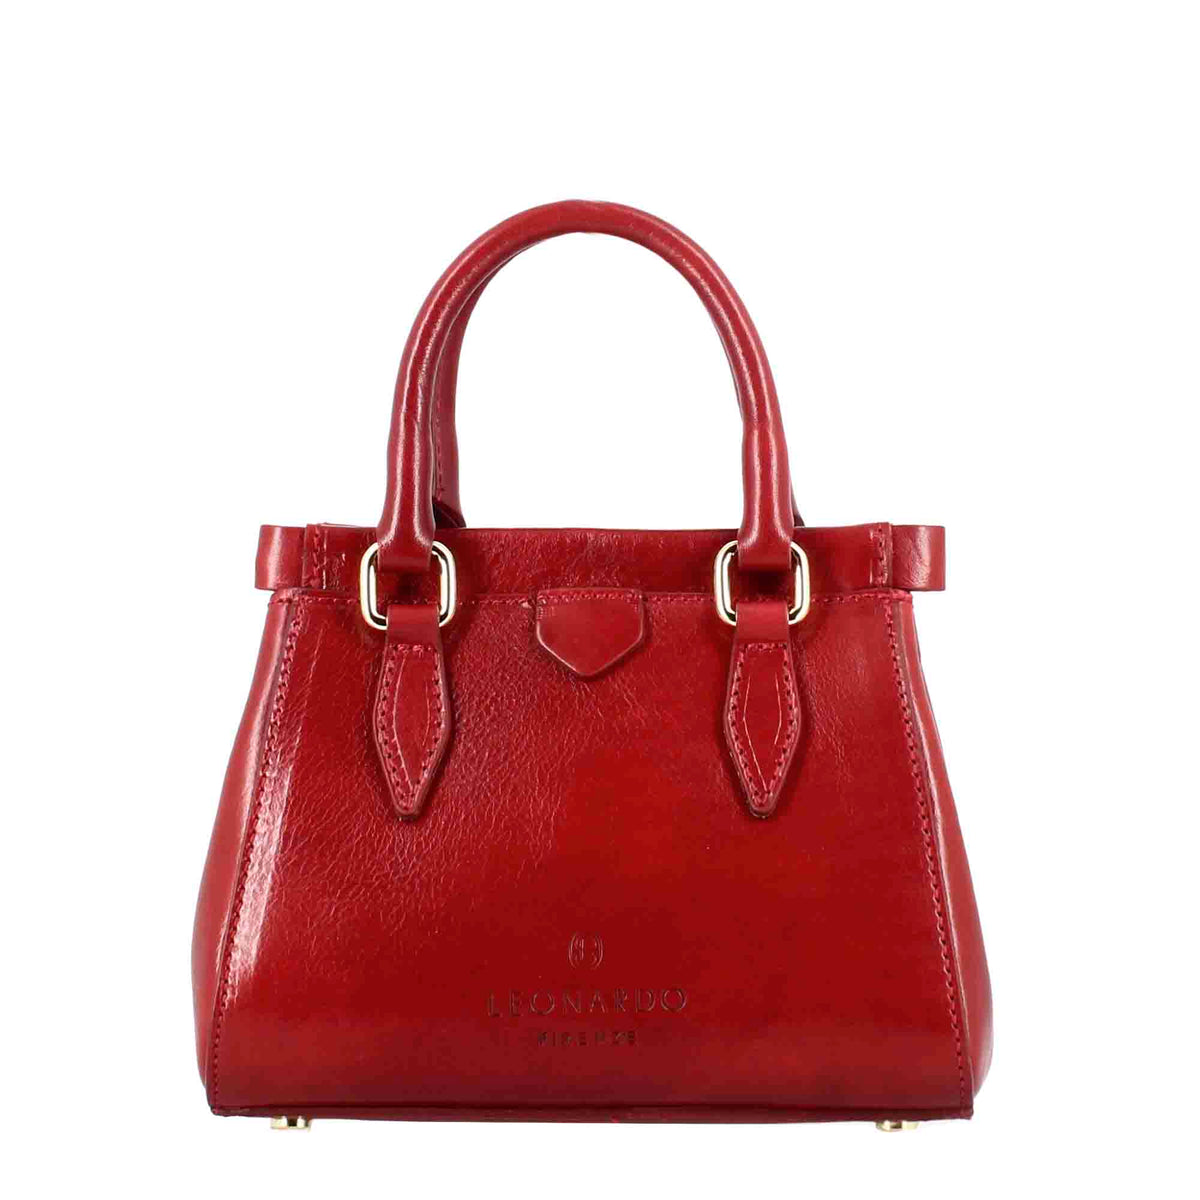 Fiorenza leather handbag with removable red shoulder strap